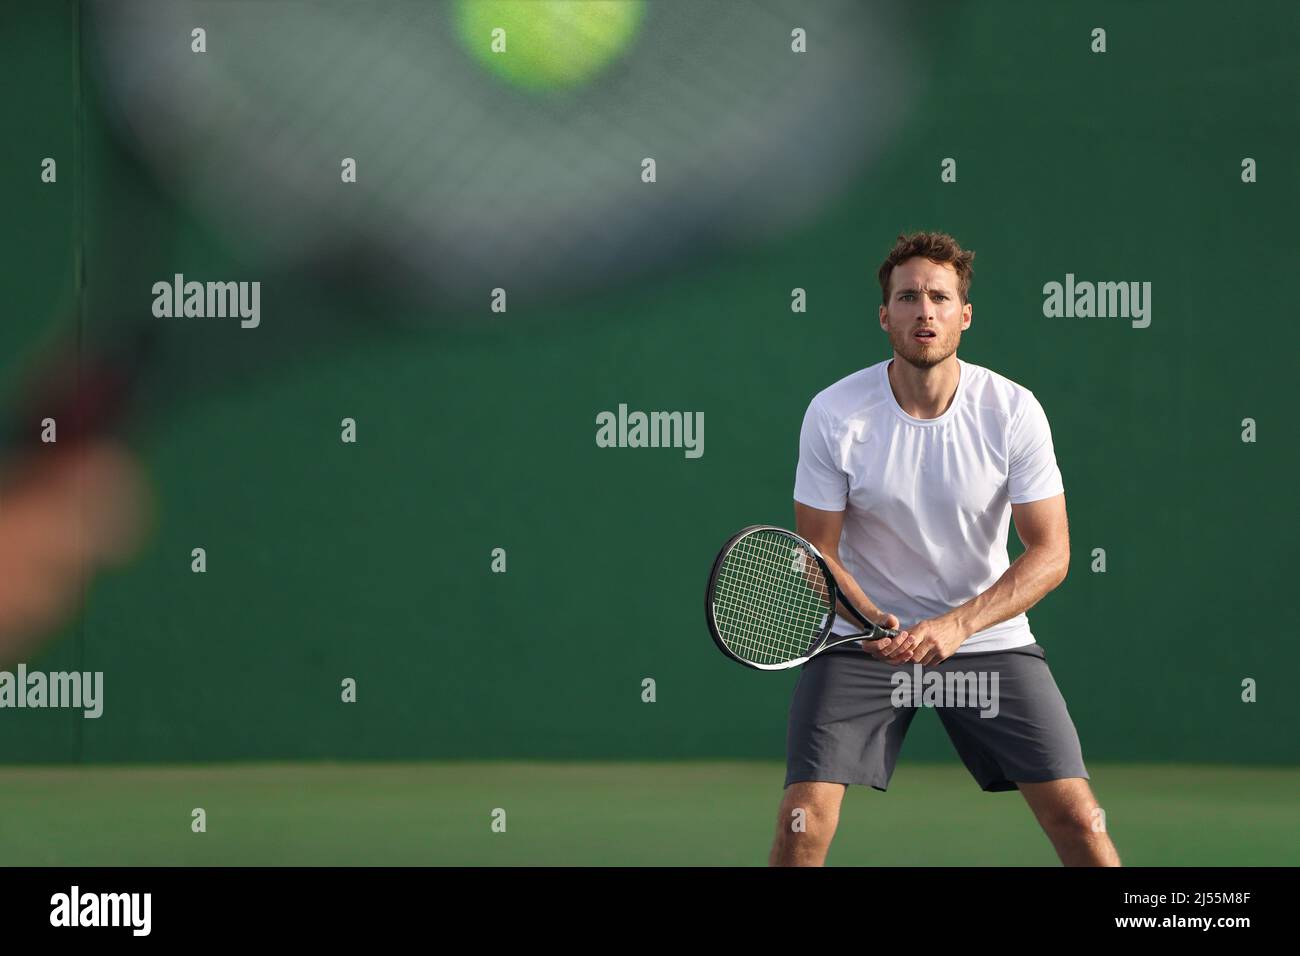 Tennis player focused on other player hitting ball with racket on court. Men sport athletes players playing tennis match together. Two professional Stock Photo